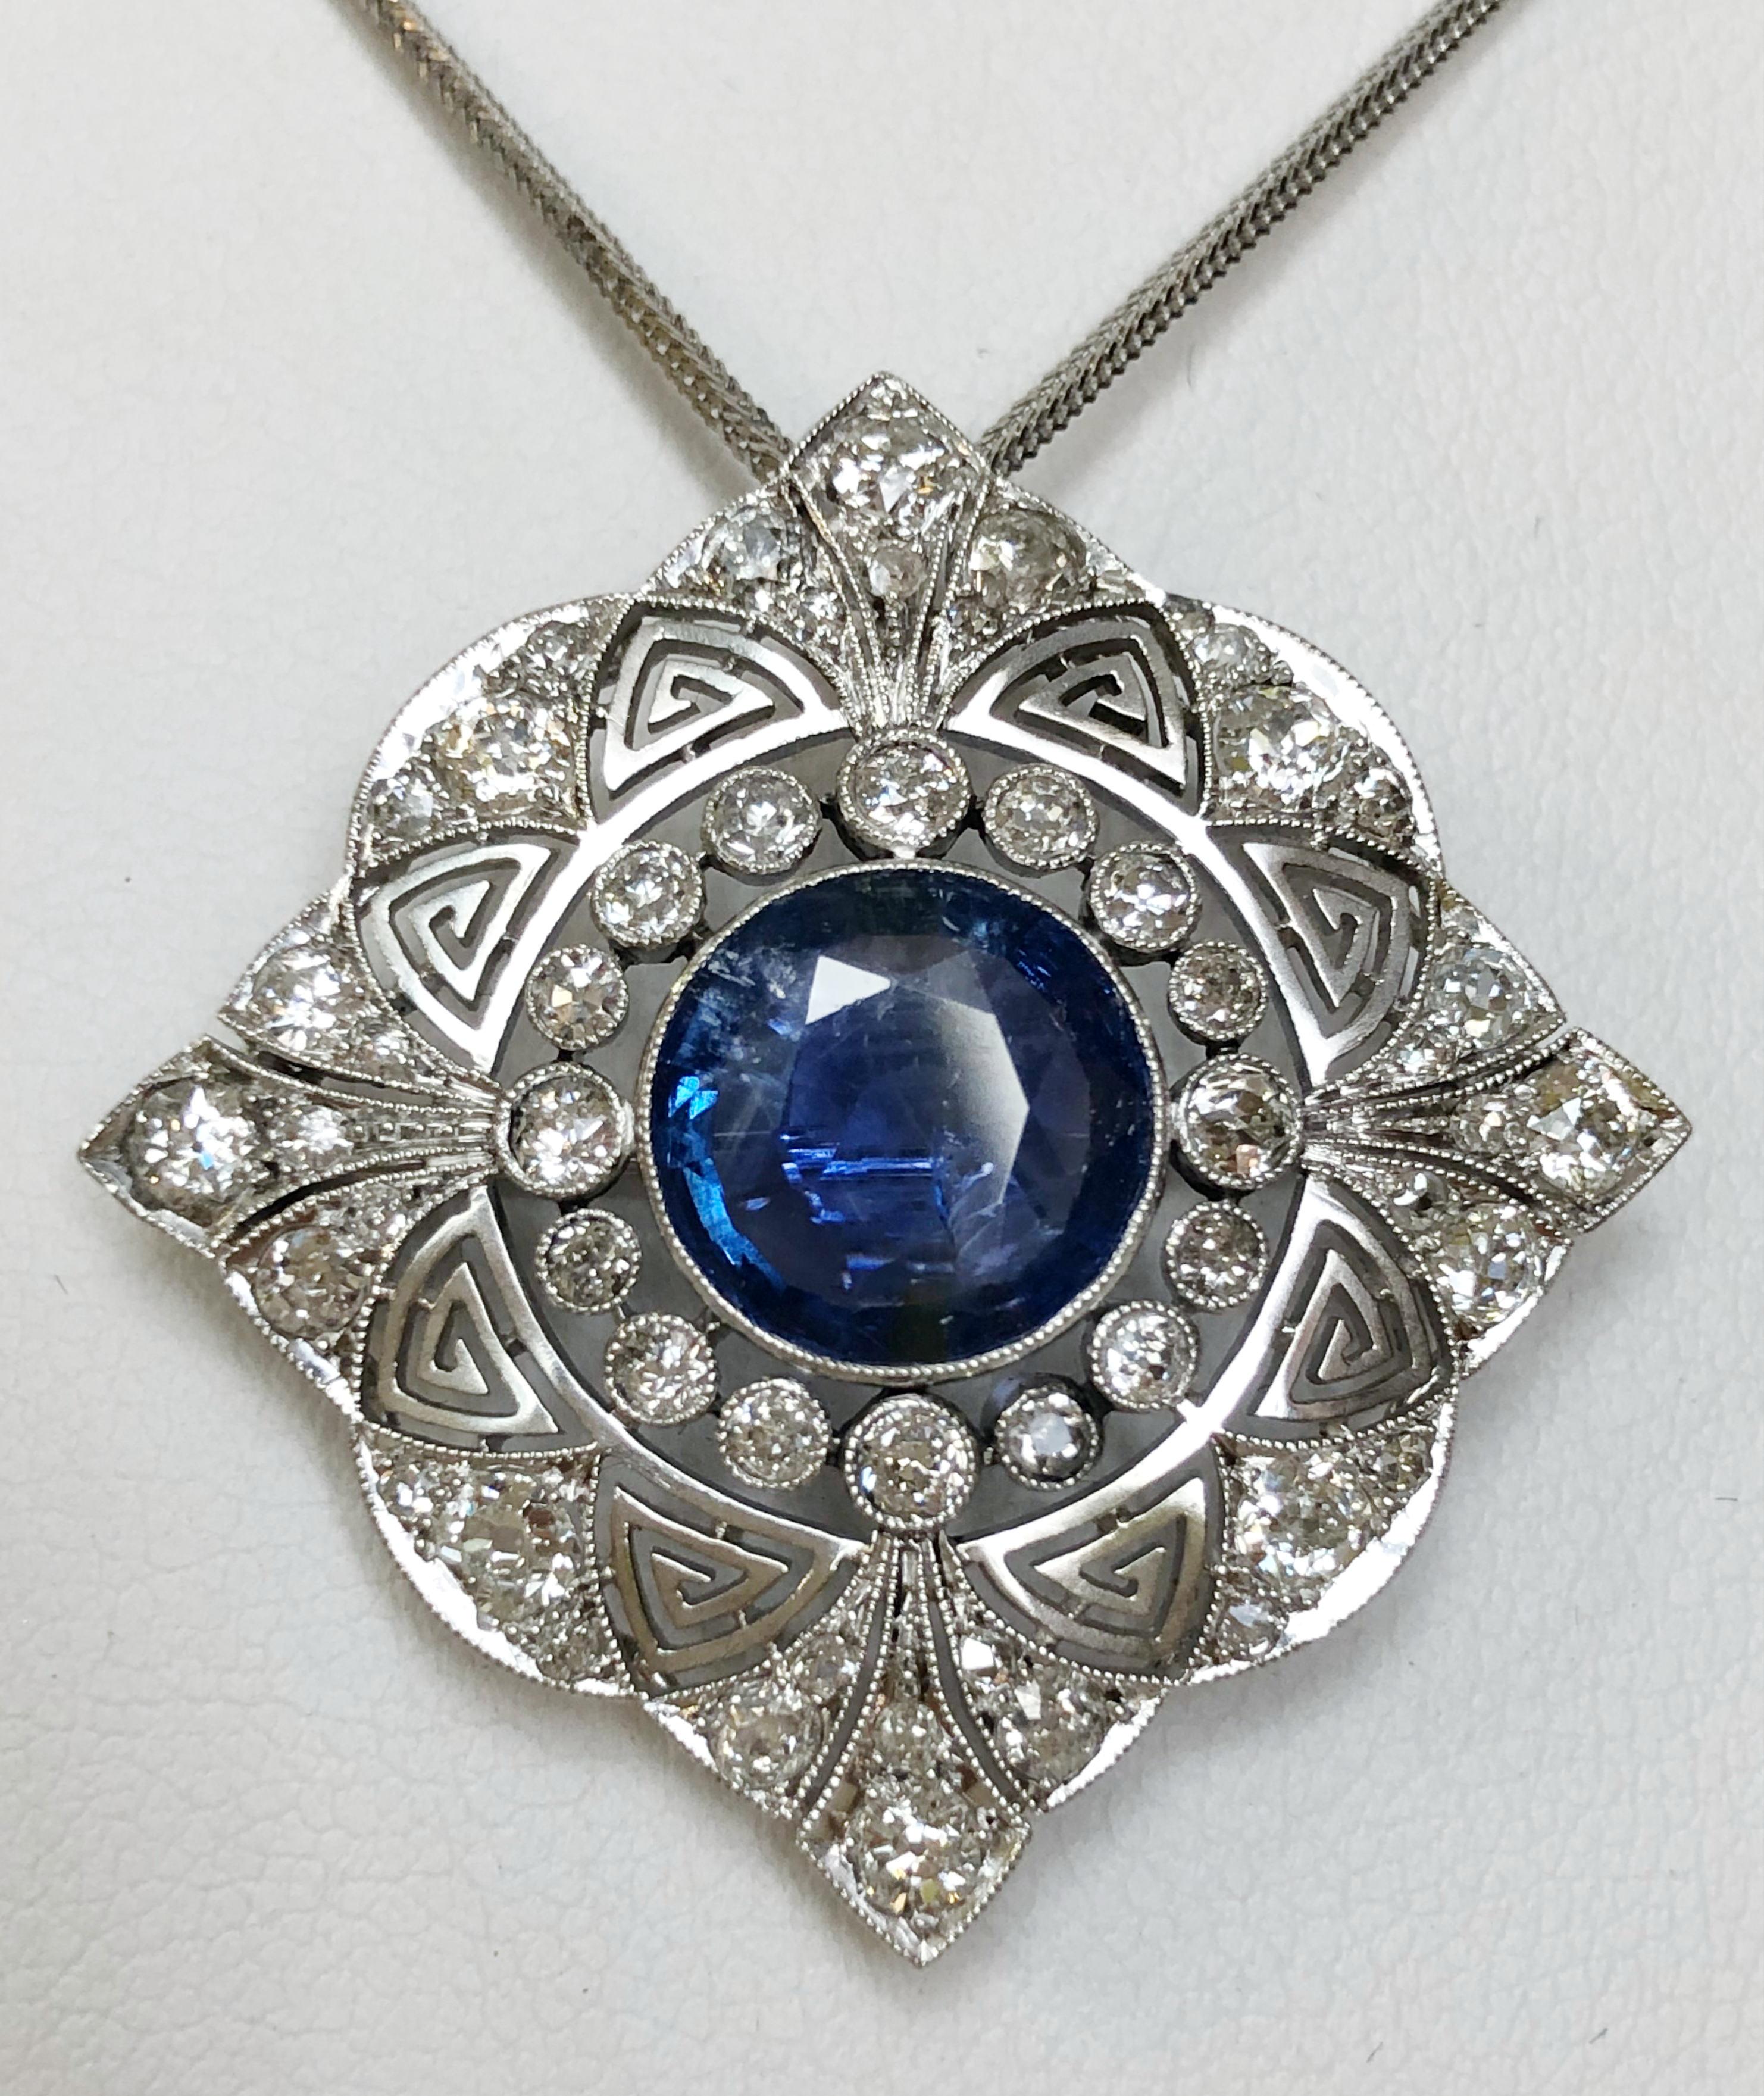 Vintage platinum necklace with 5 karats of blue Ceylon sapphire surrounded by brilliant diamonds, Italy 1920s
Length 42 cm